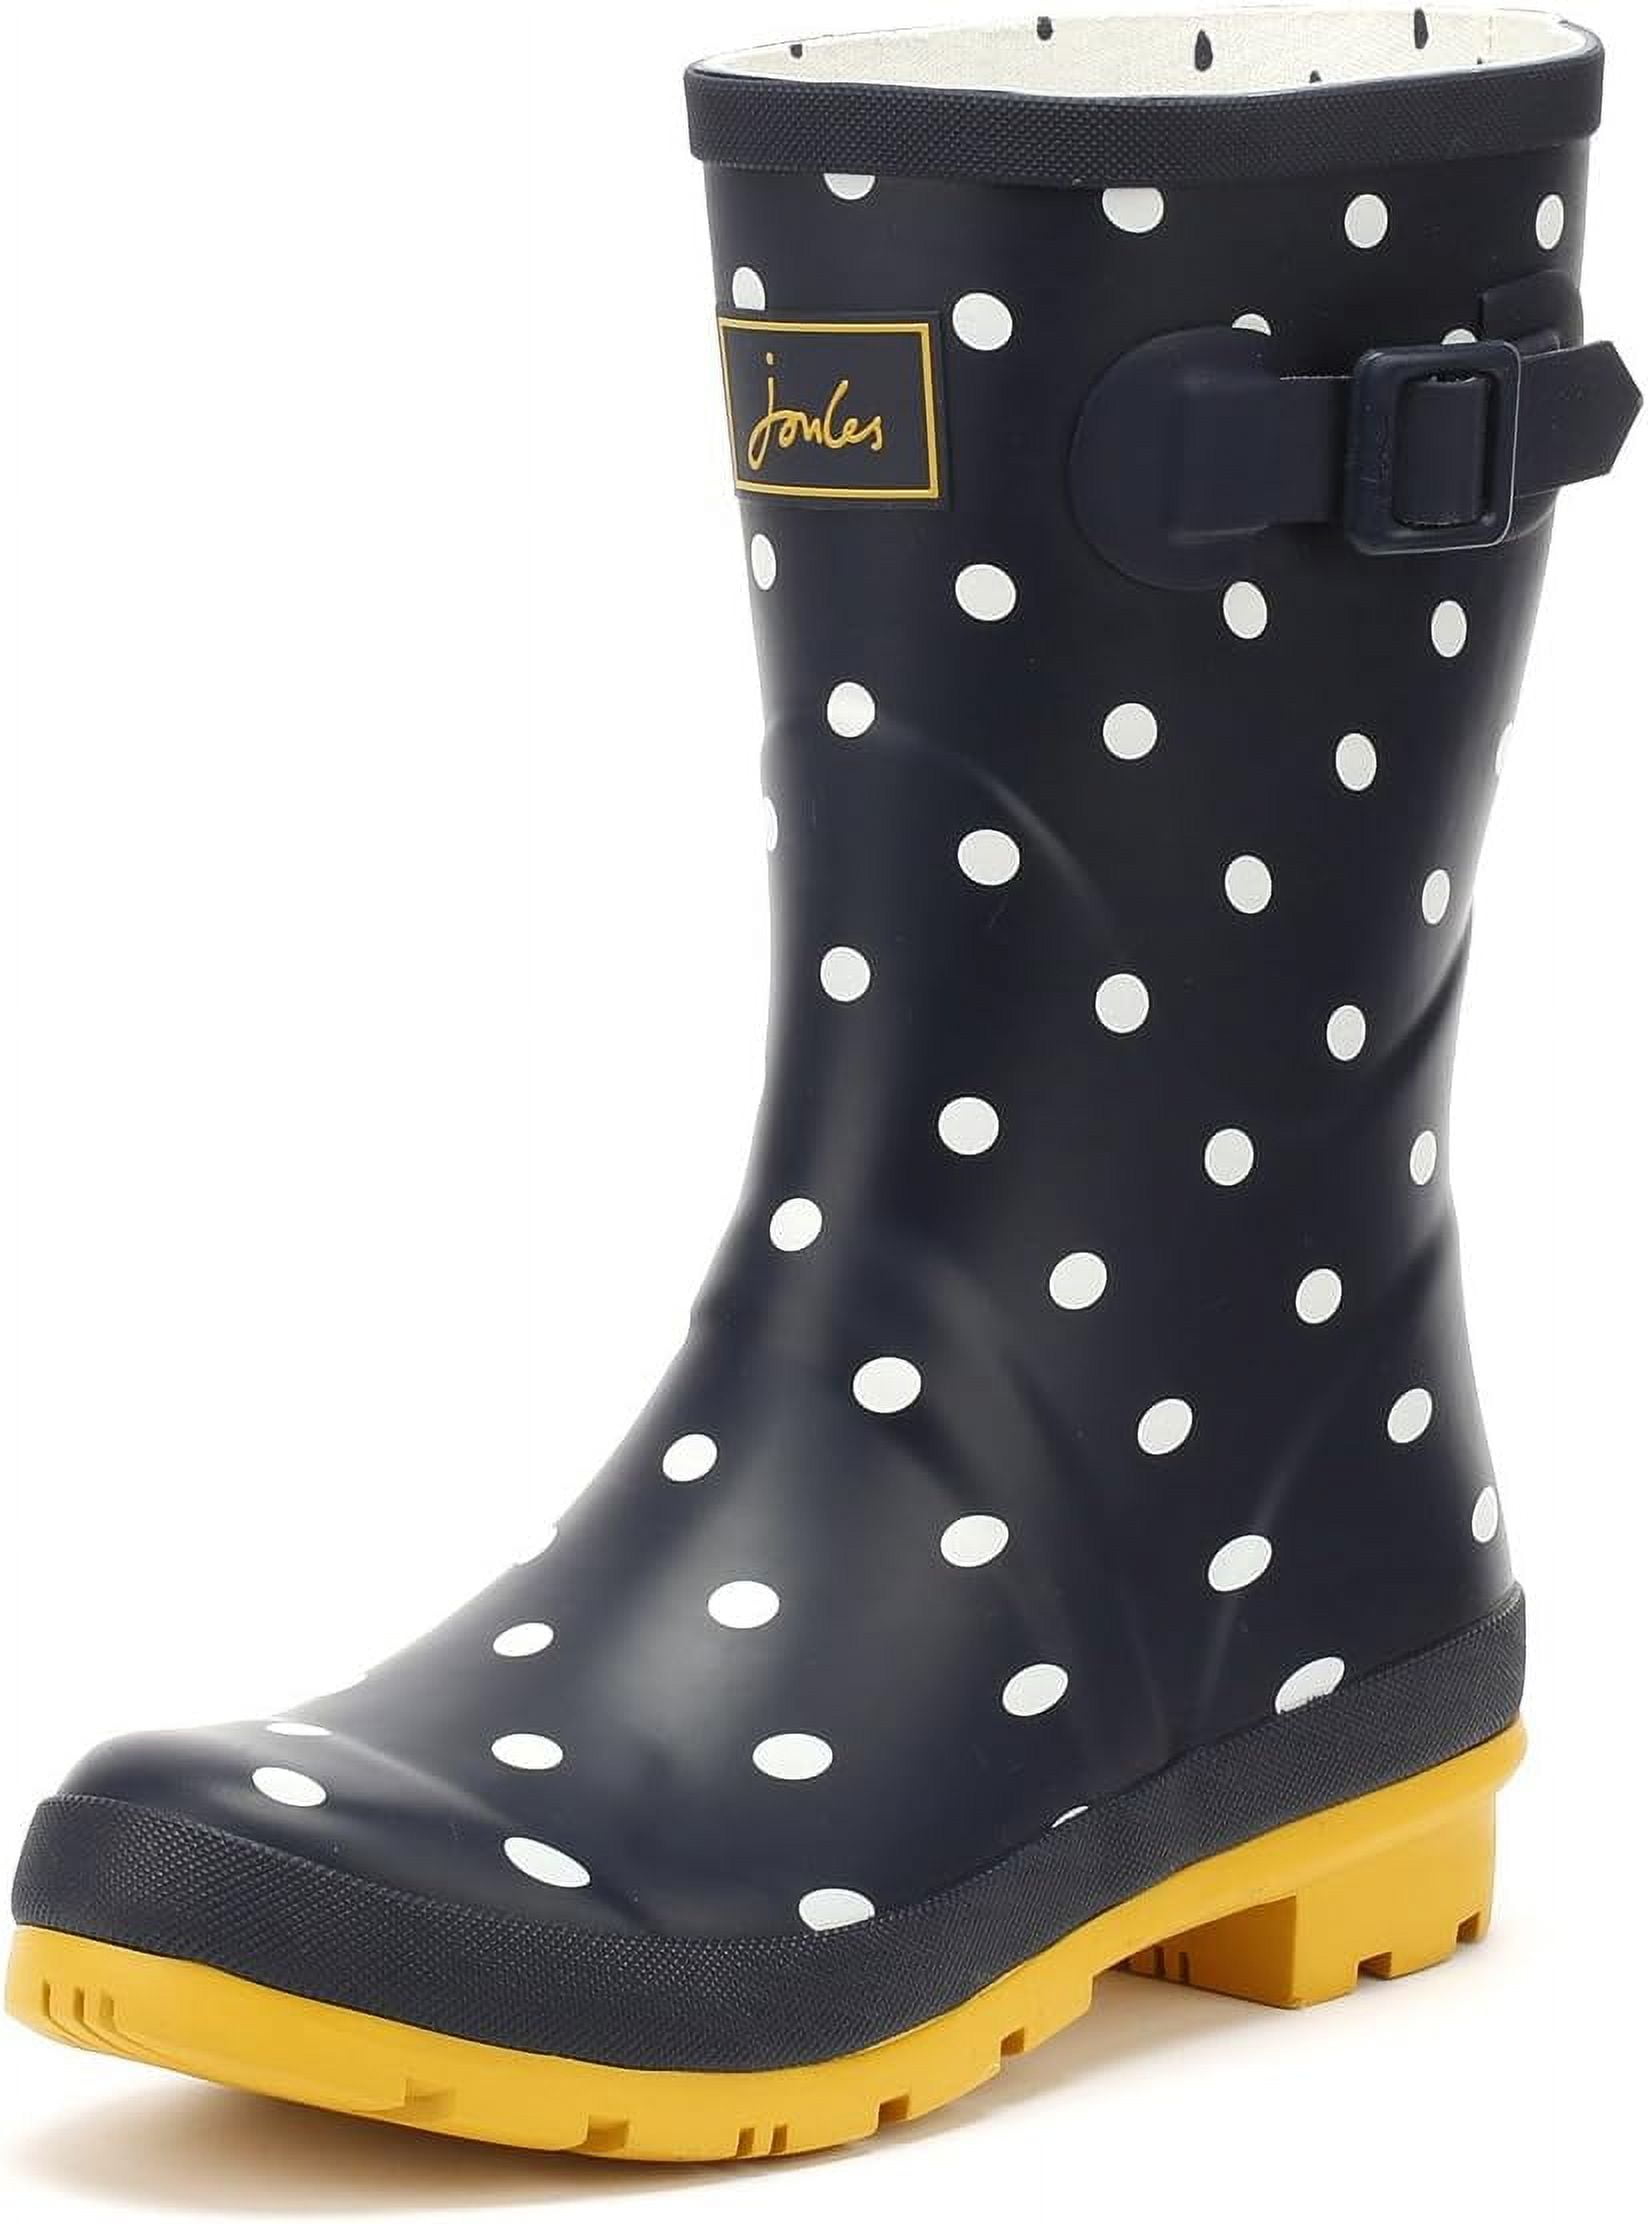 Joules Women's Wellington Welly Boot 7 French Navy Spot